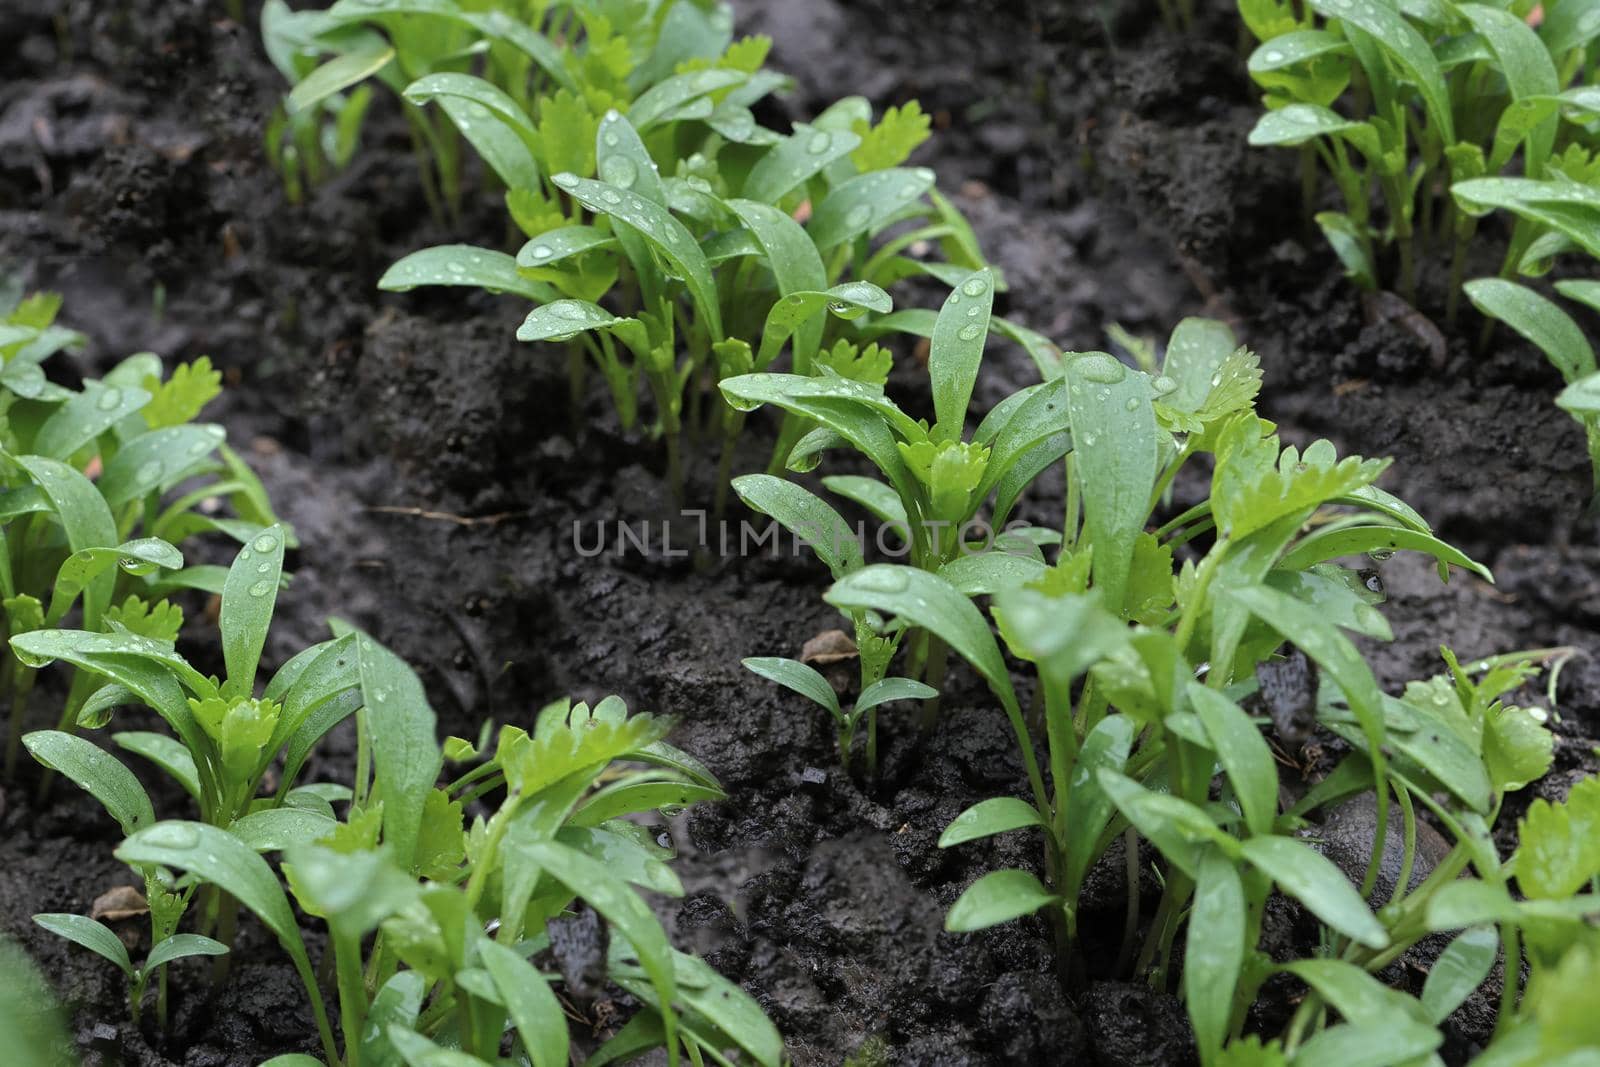 young greenery in the garden. Rows of green spinach, chard, lettuce on a garden bed. high quality photo by Proxima13